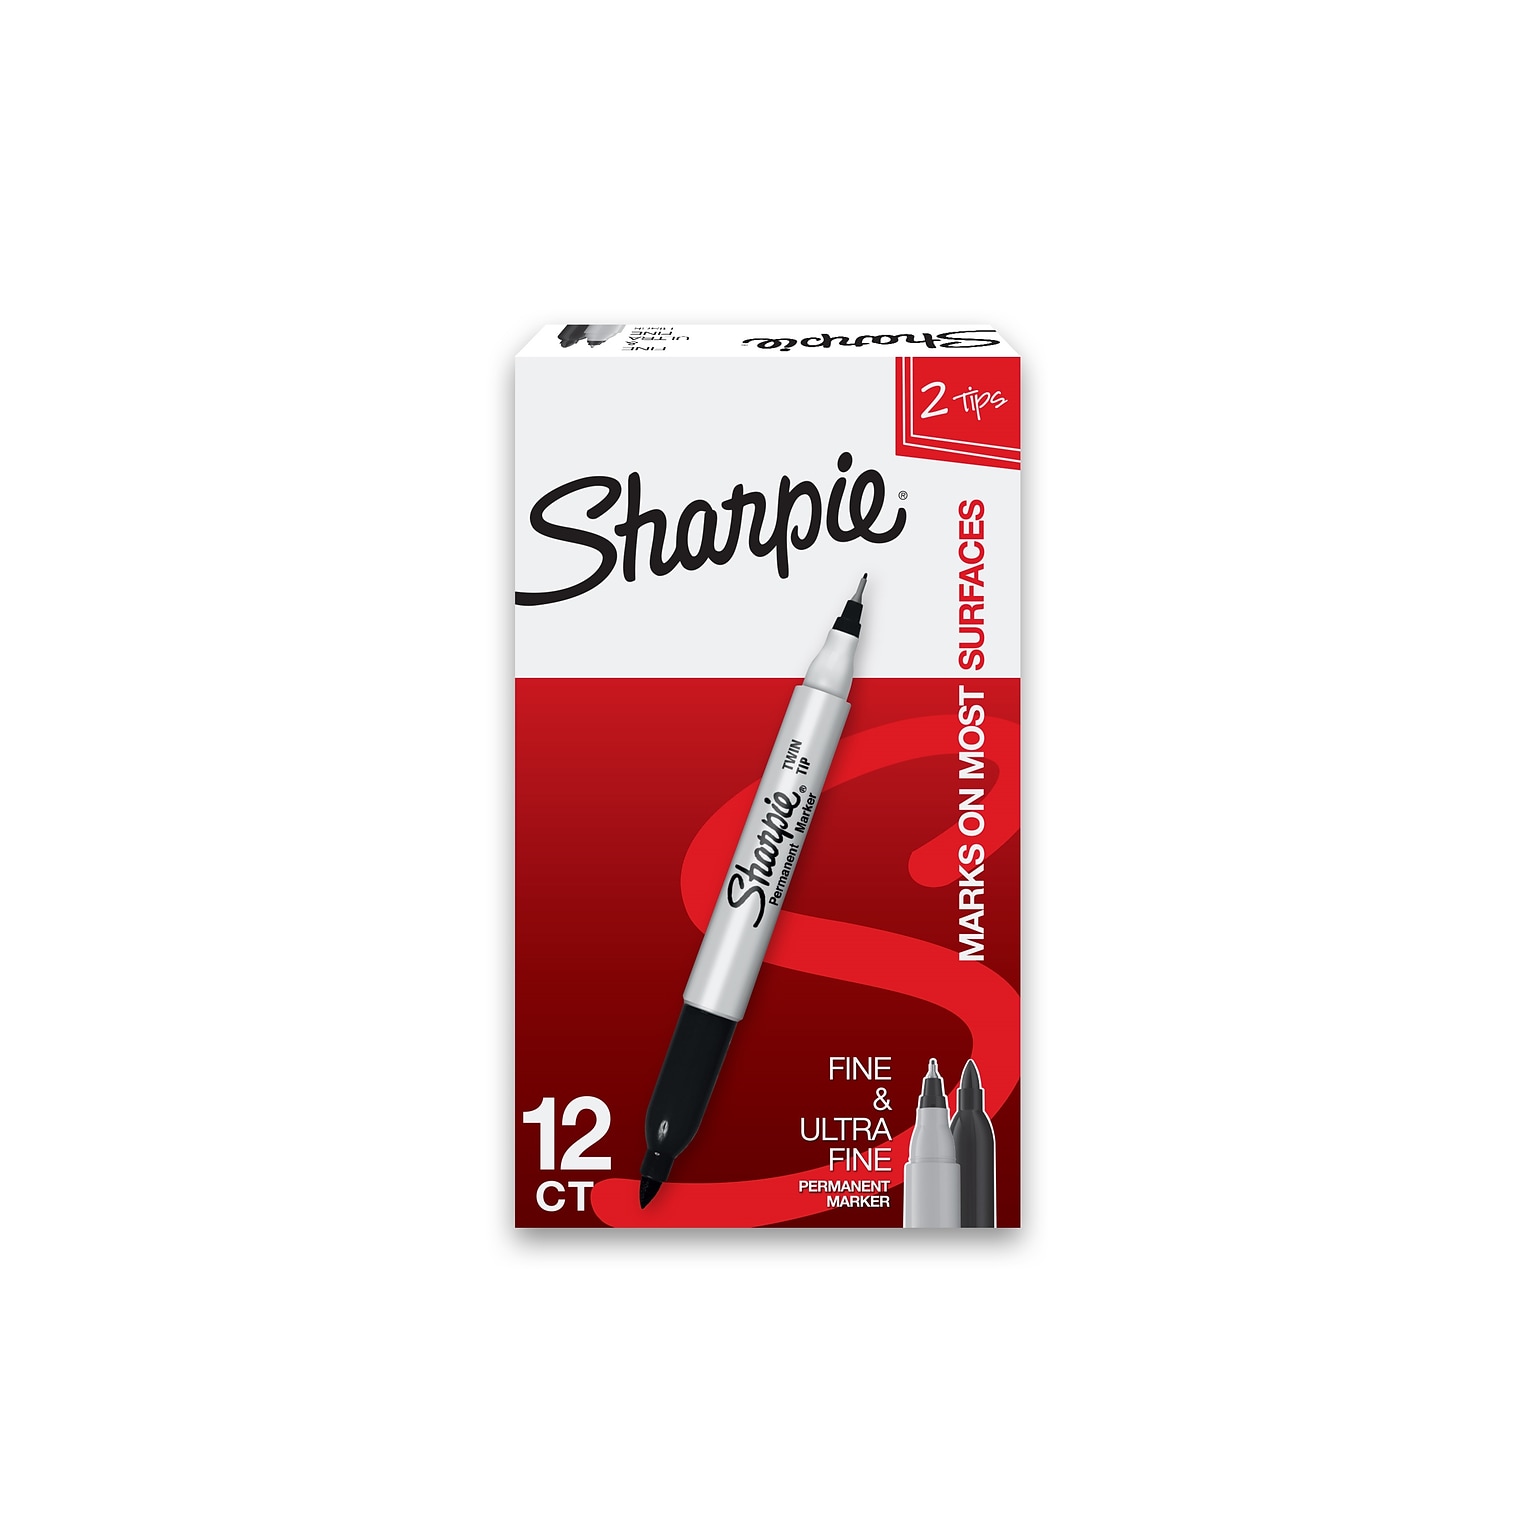 Sharpie Permanent Markers, Twin Tip, Black, 12/Pack (32001)